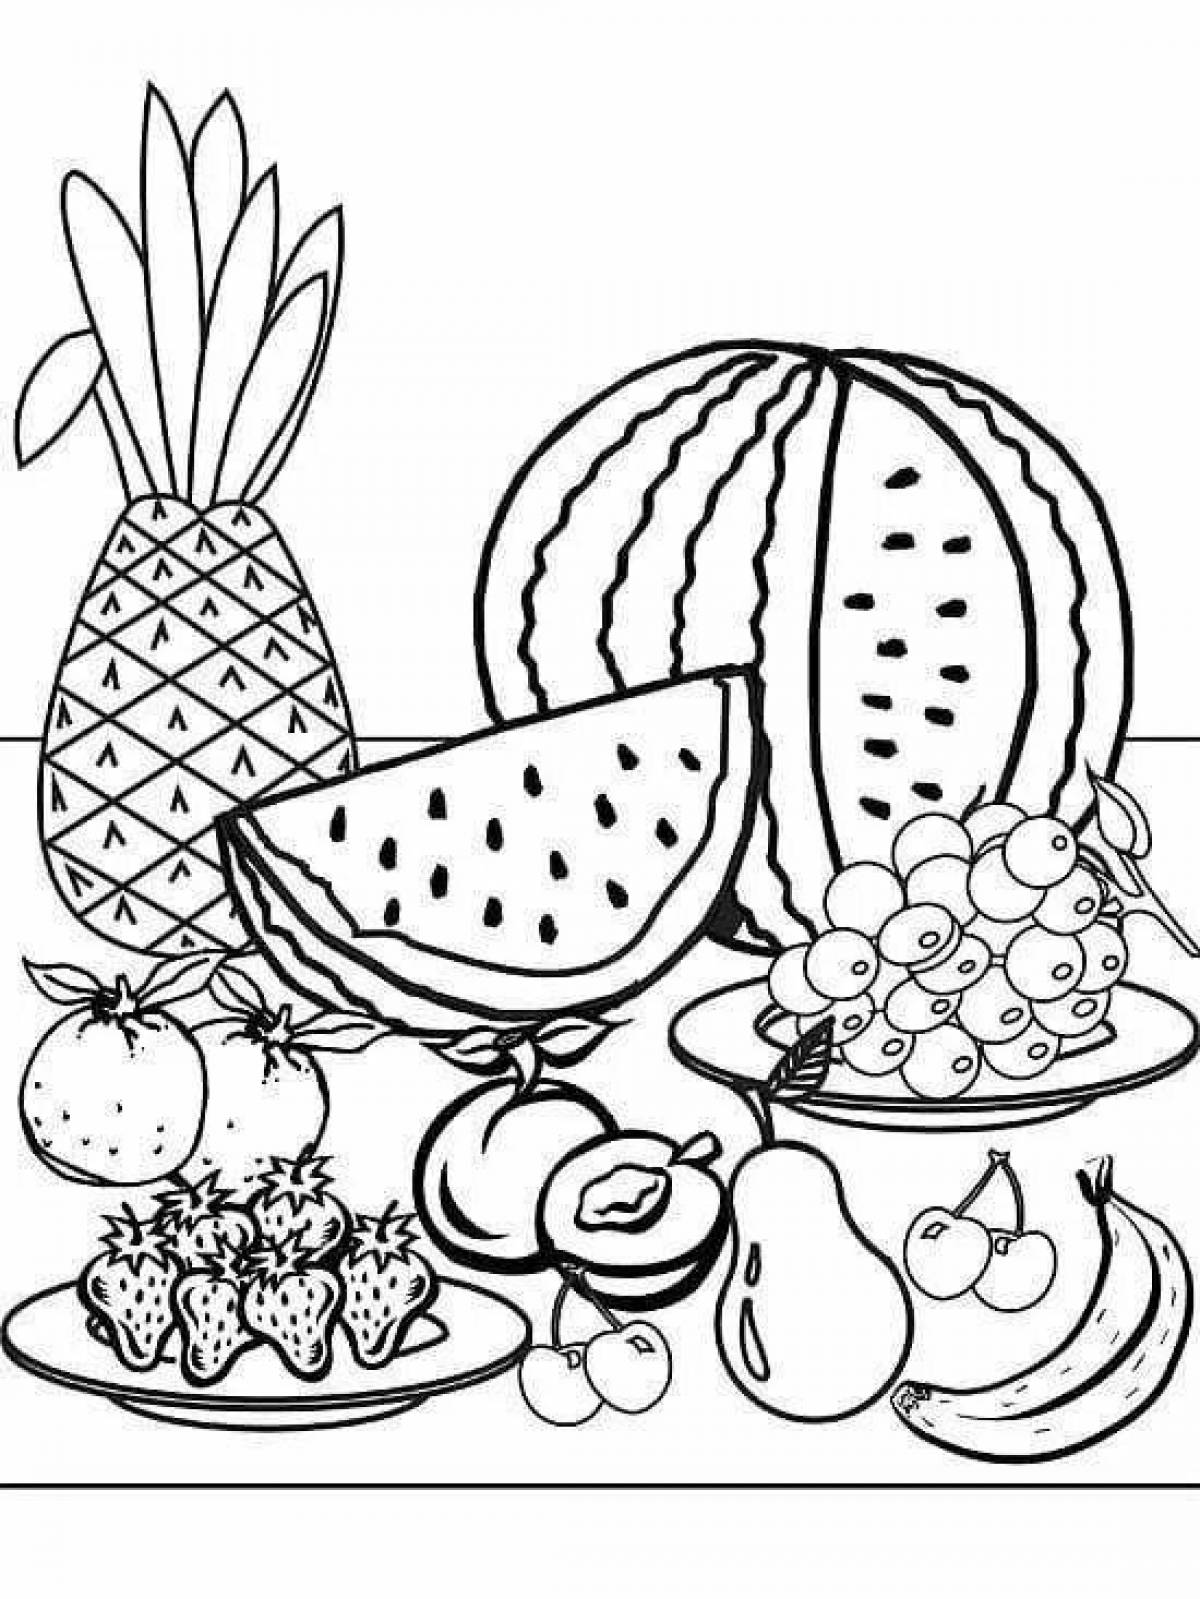 Inspirational coloring book about proper nutrition